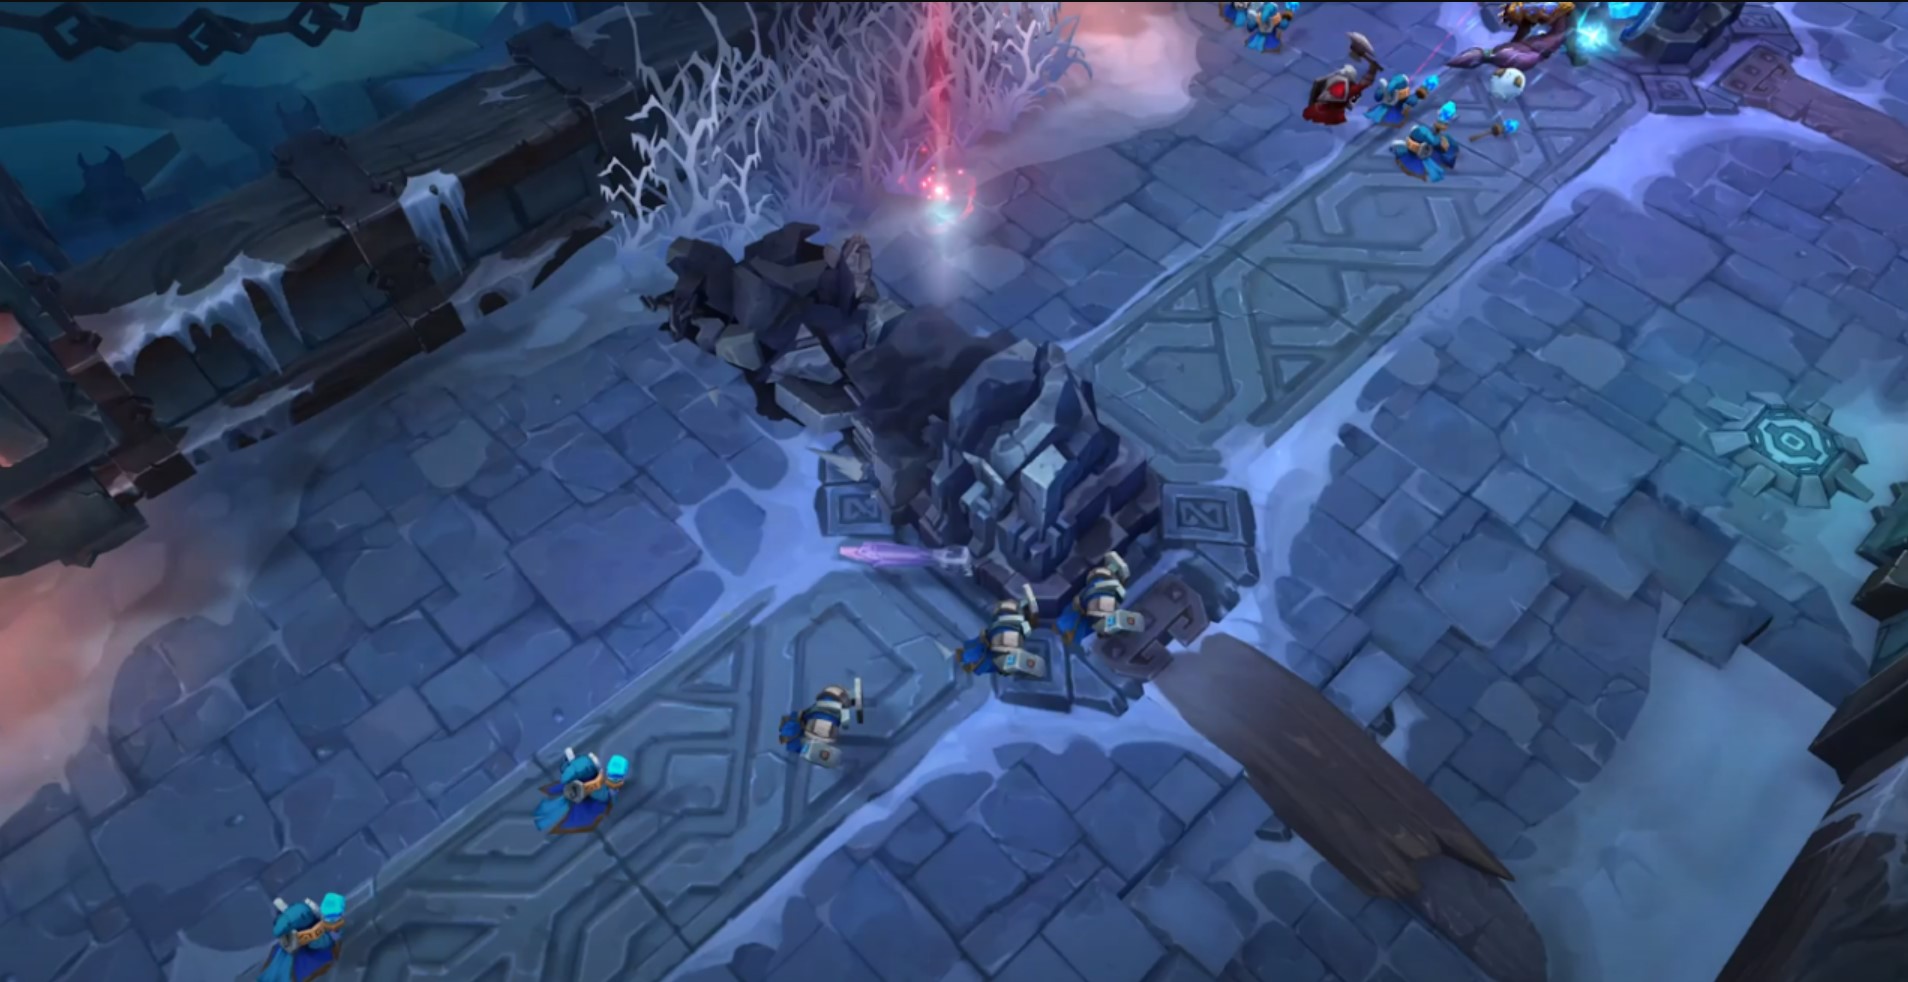 League players continue to raise complaints against game's sweeping